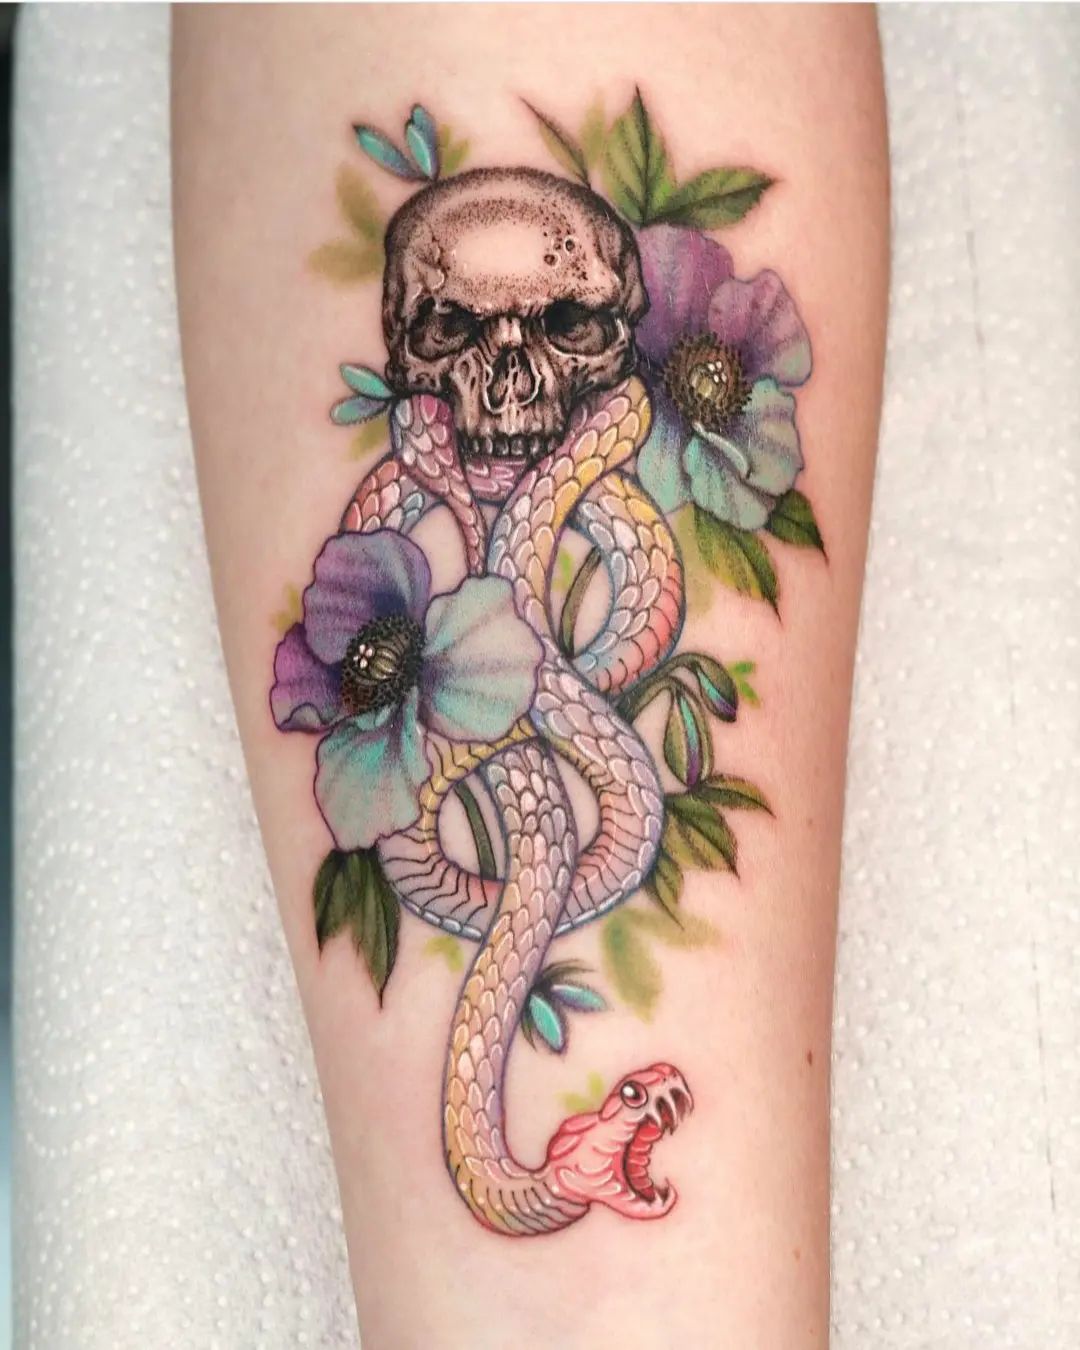 Death eater tattoo has never been this cute that much. The soft colors and flowers make a great combo with green leaves. This tattoo shows a contrast between the dark nature of death eaters with the beauty of the nature. Why don't you give it a shot?